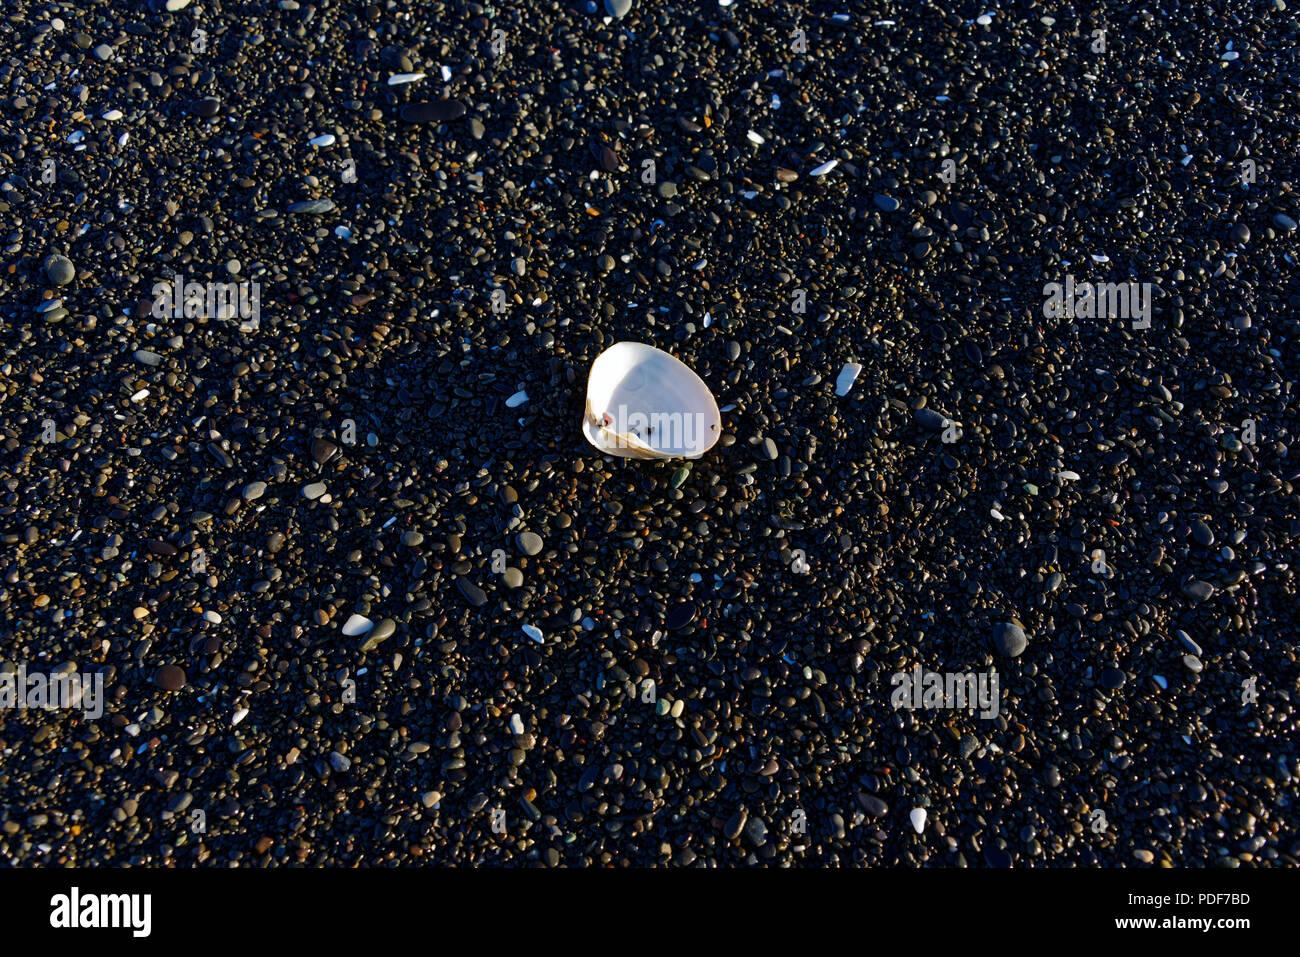 A shell surrounded by pebbles on a stony beach showing the different colours of the stones against the whiteness of the shell. Stock Photo